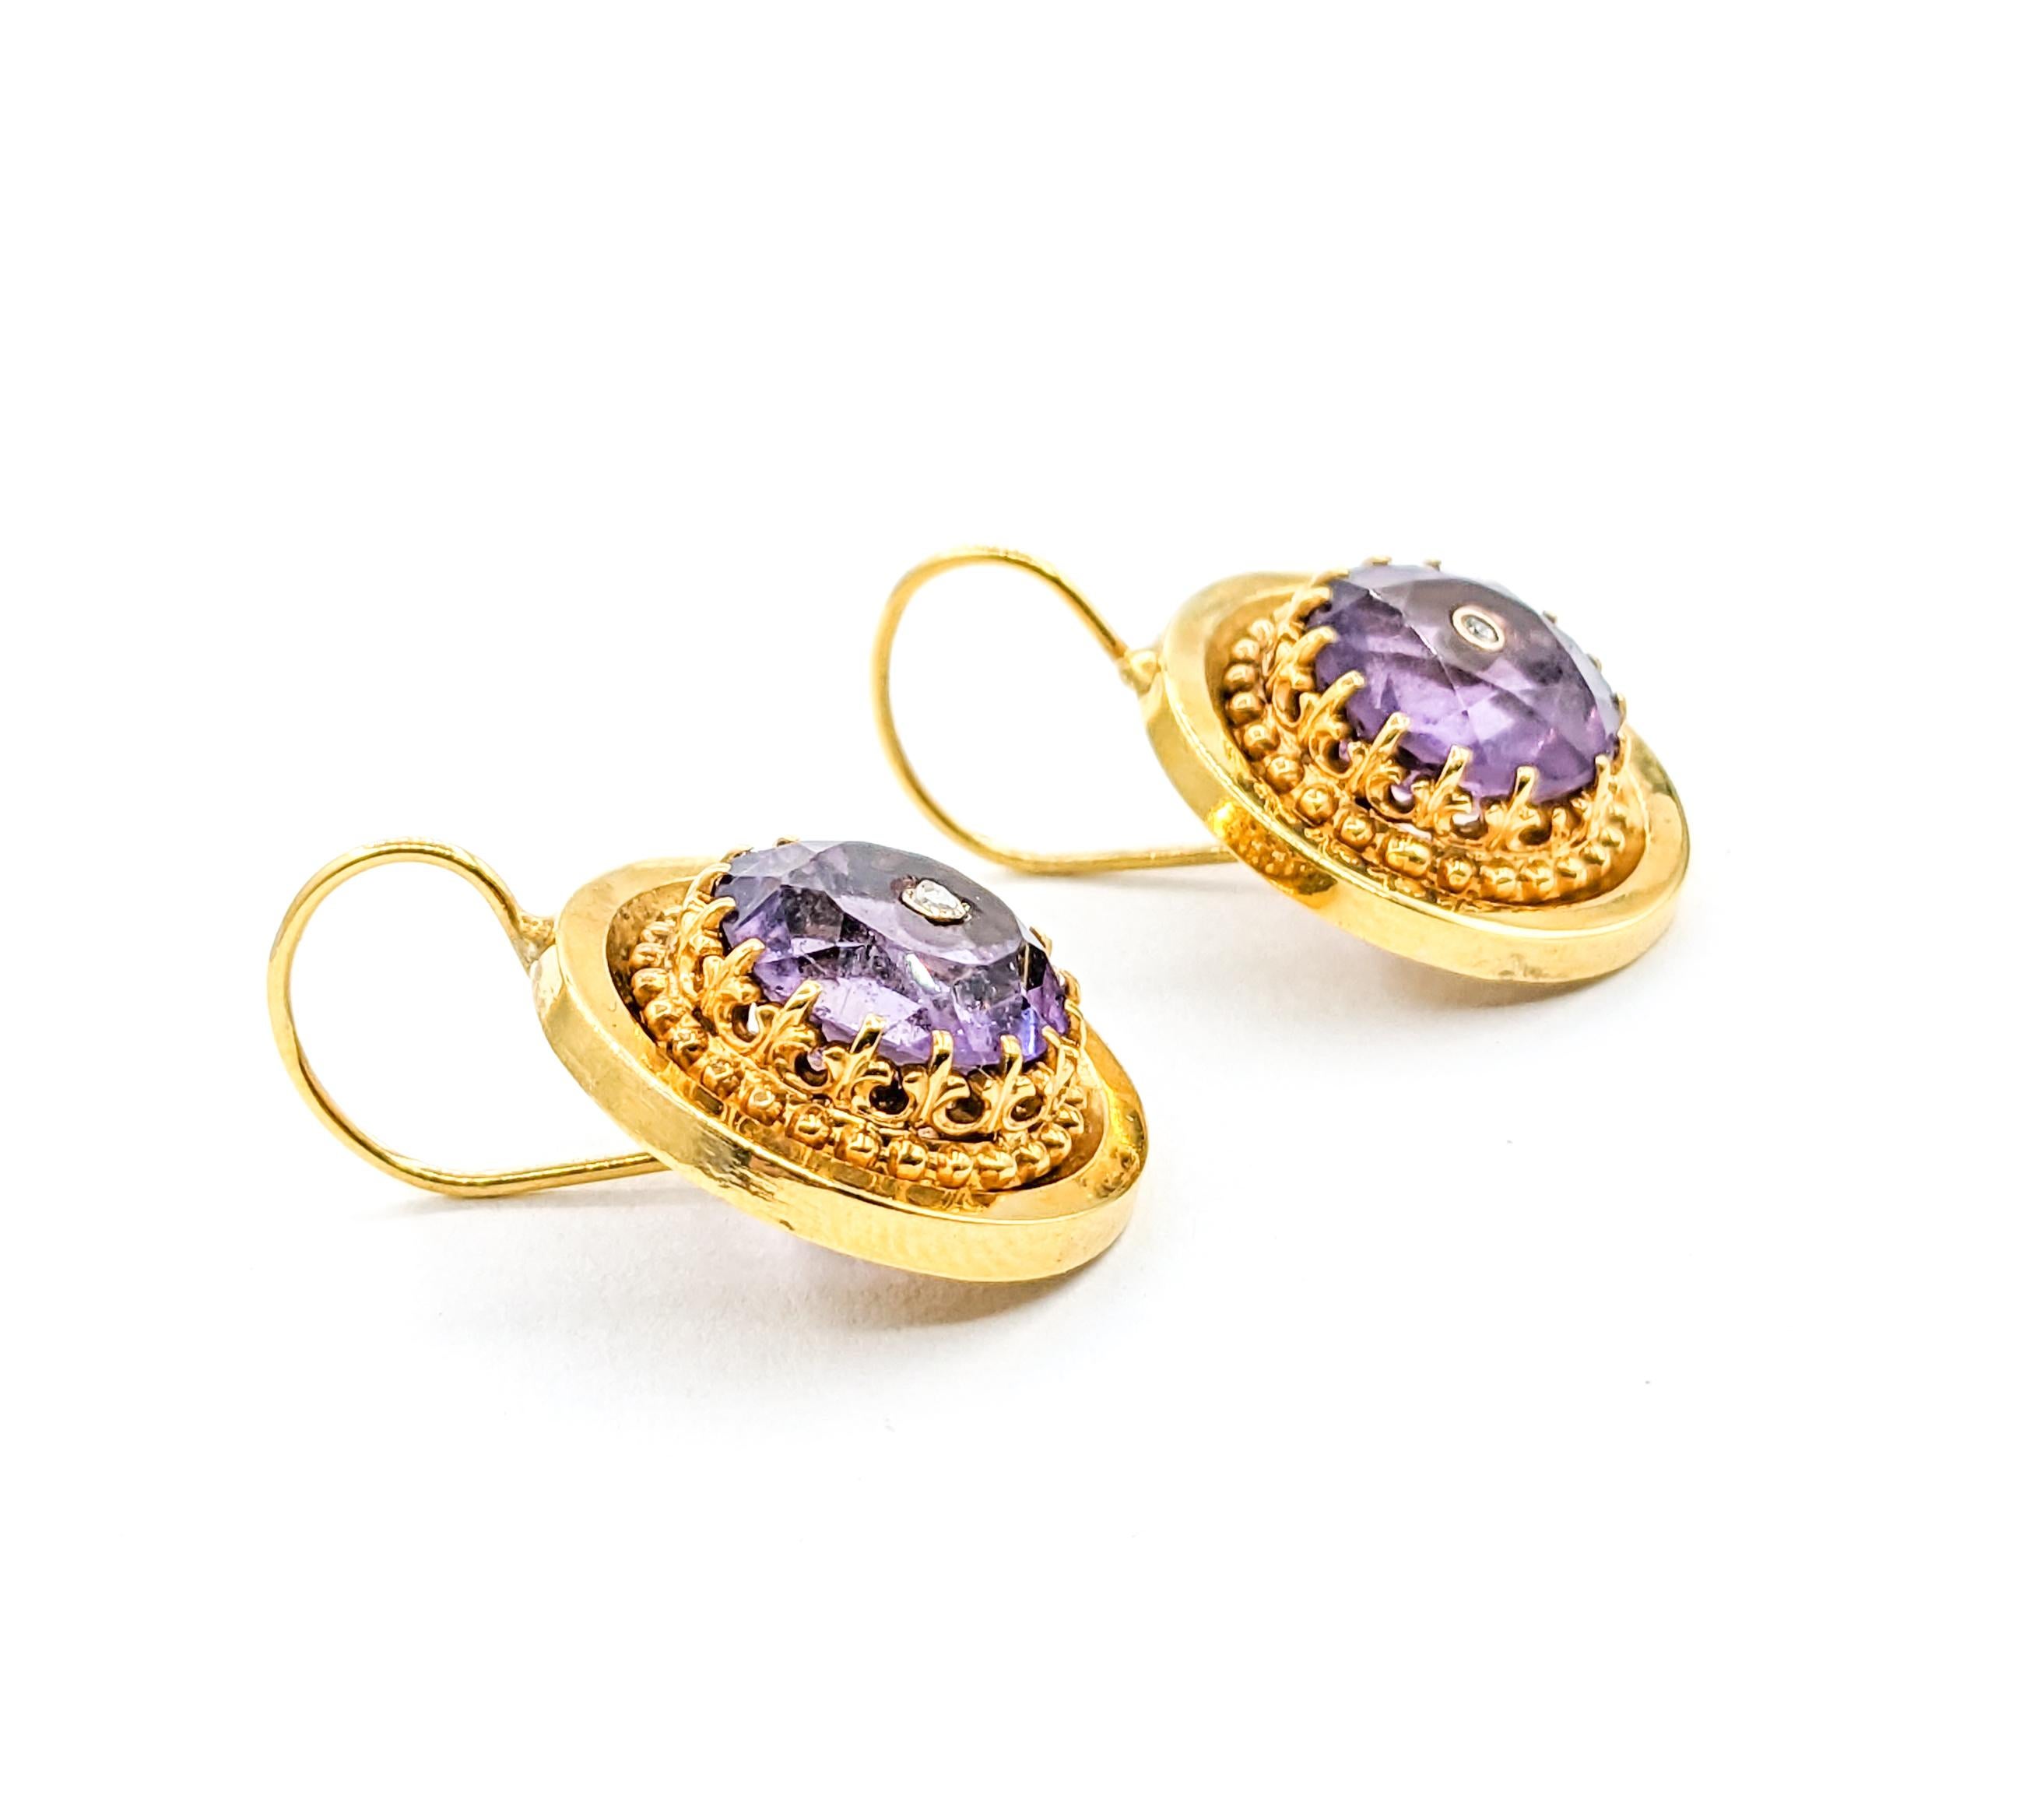 Romantic Diamond & Amethyst Drop Earrings in Yellow Gold In Excellent Condition For Sale In Bloomington, MN